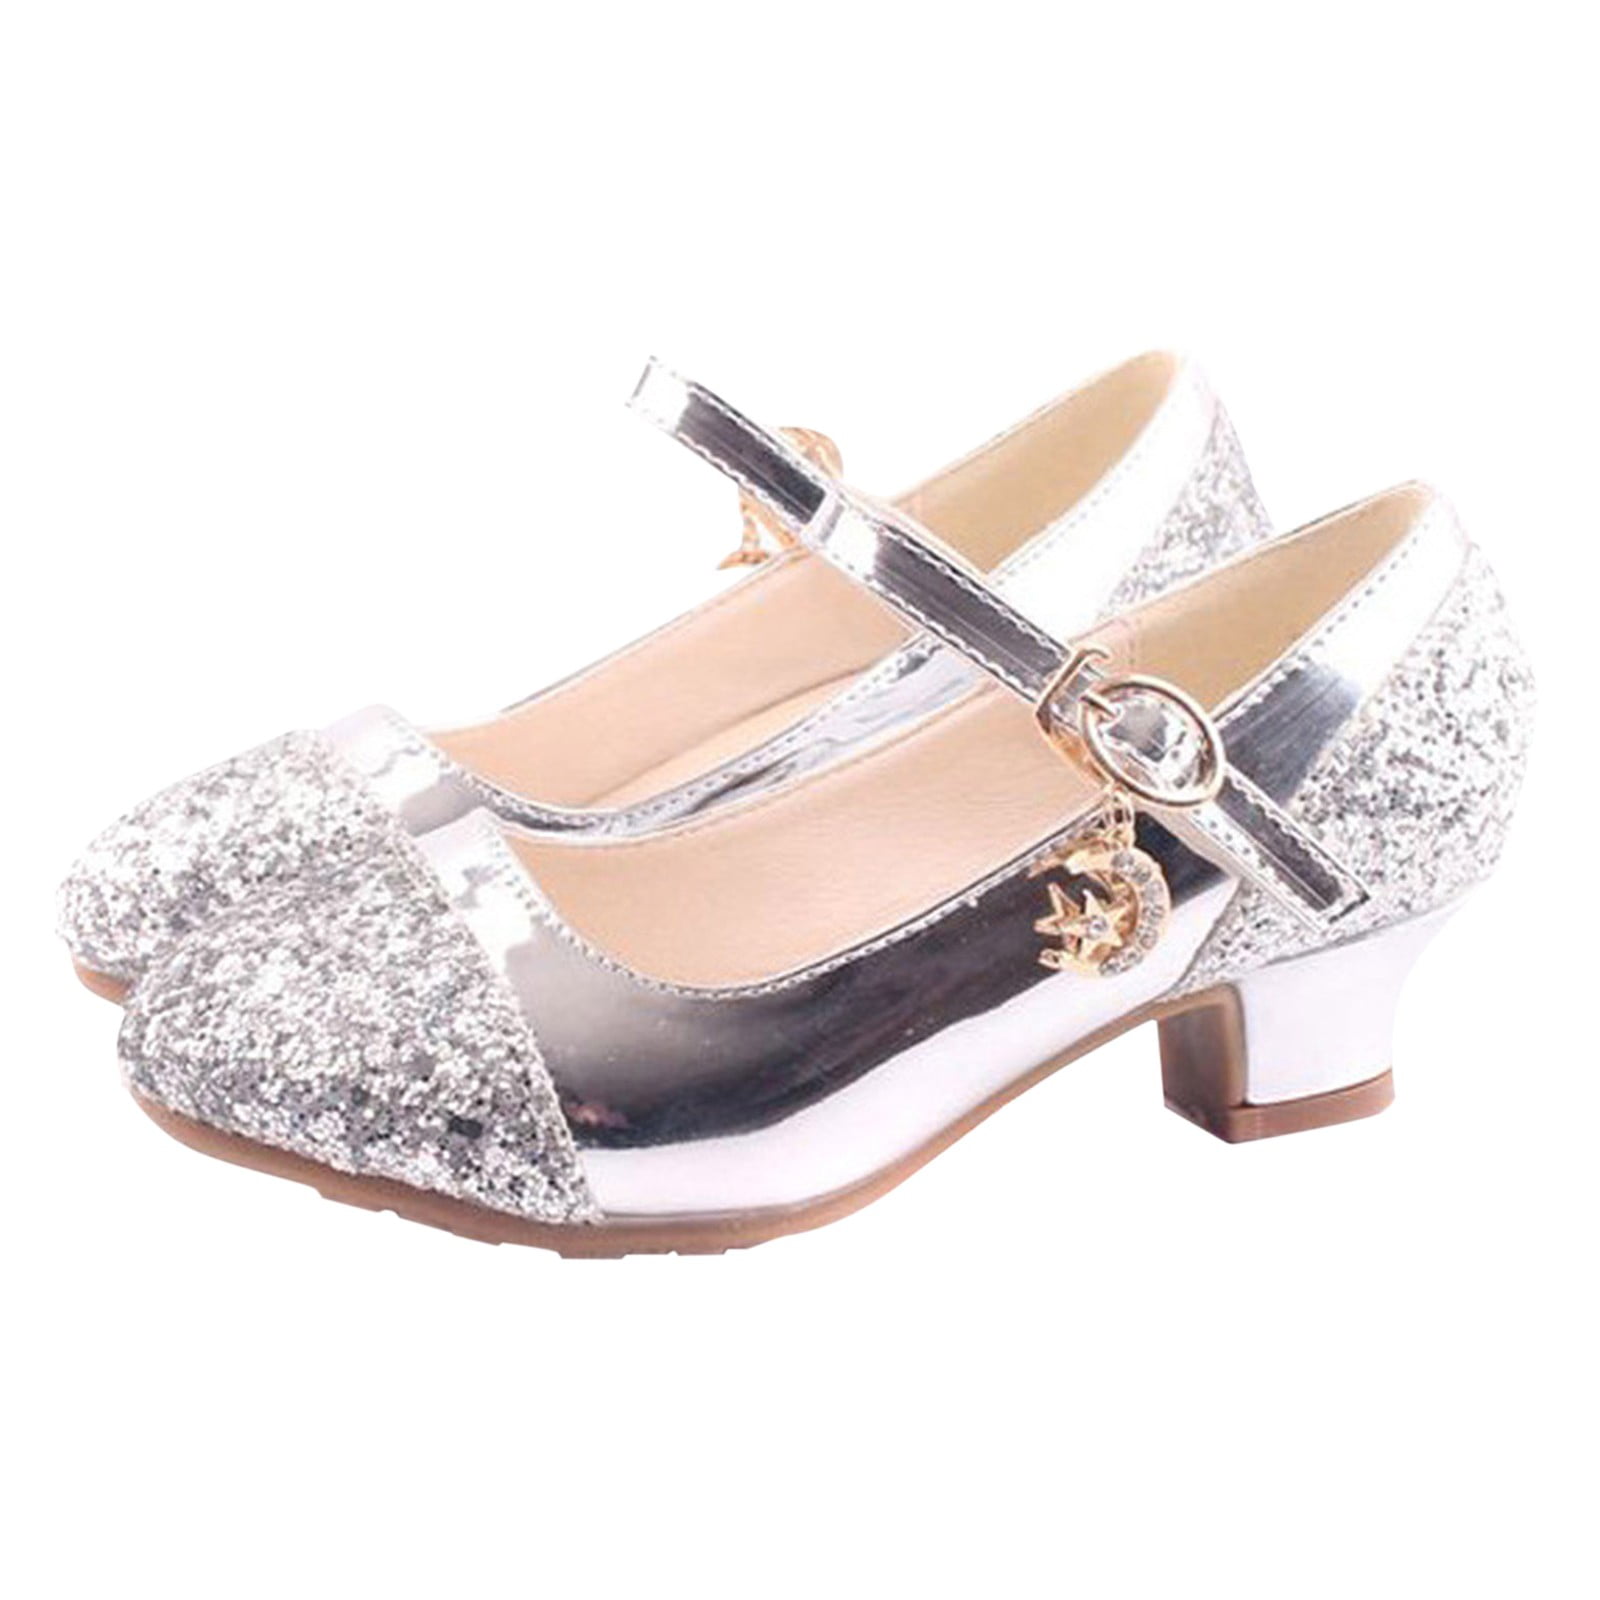 Wholesale Prom Shoes | Clear Ankle Strap Mid Heel | Blossom Footwear –  BLOSSOM FOOTWEAR